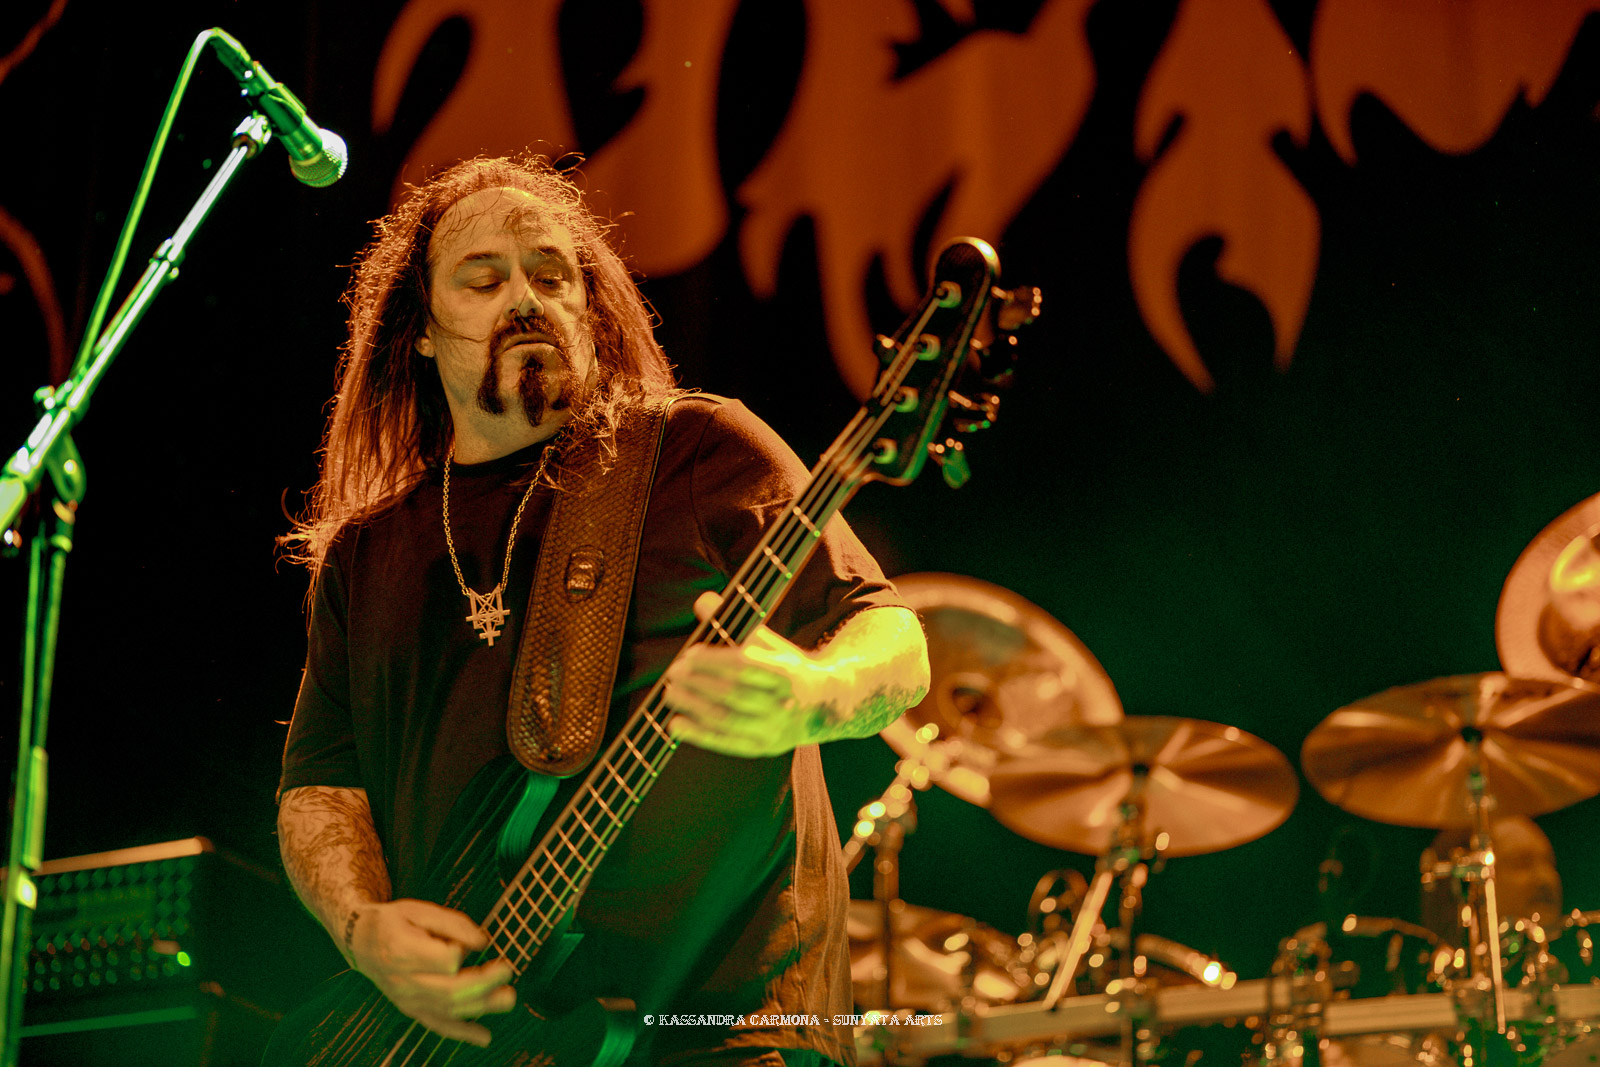 Deicide at Beyond The Gates